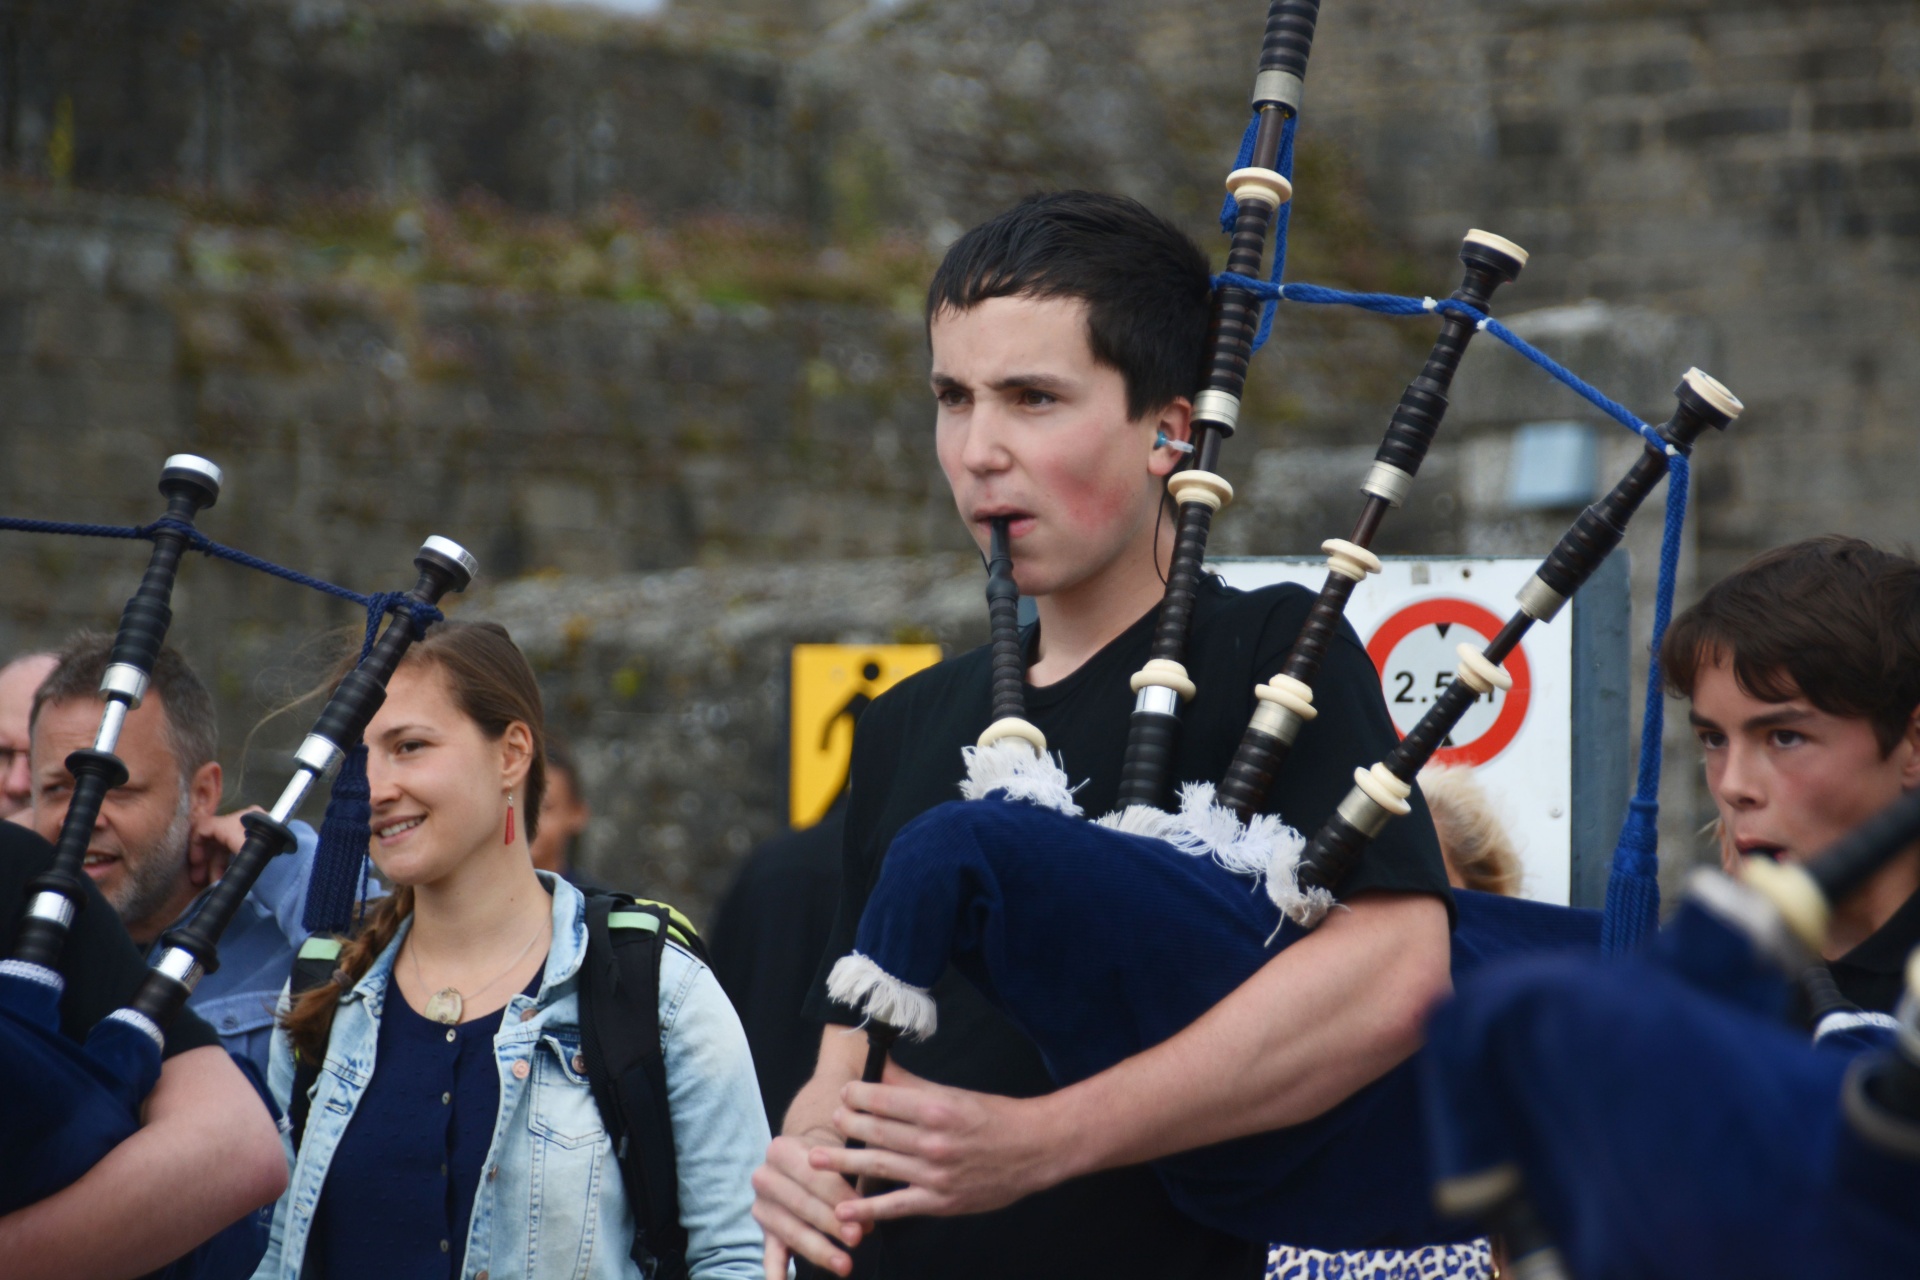 bagpipe music musicians free photo